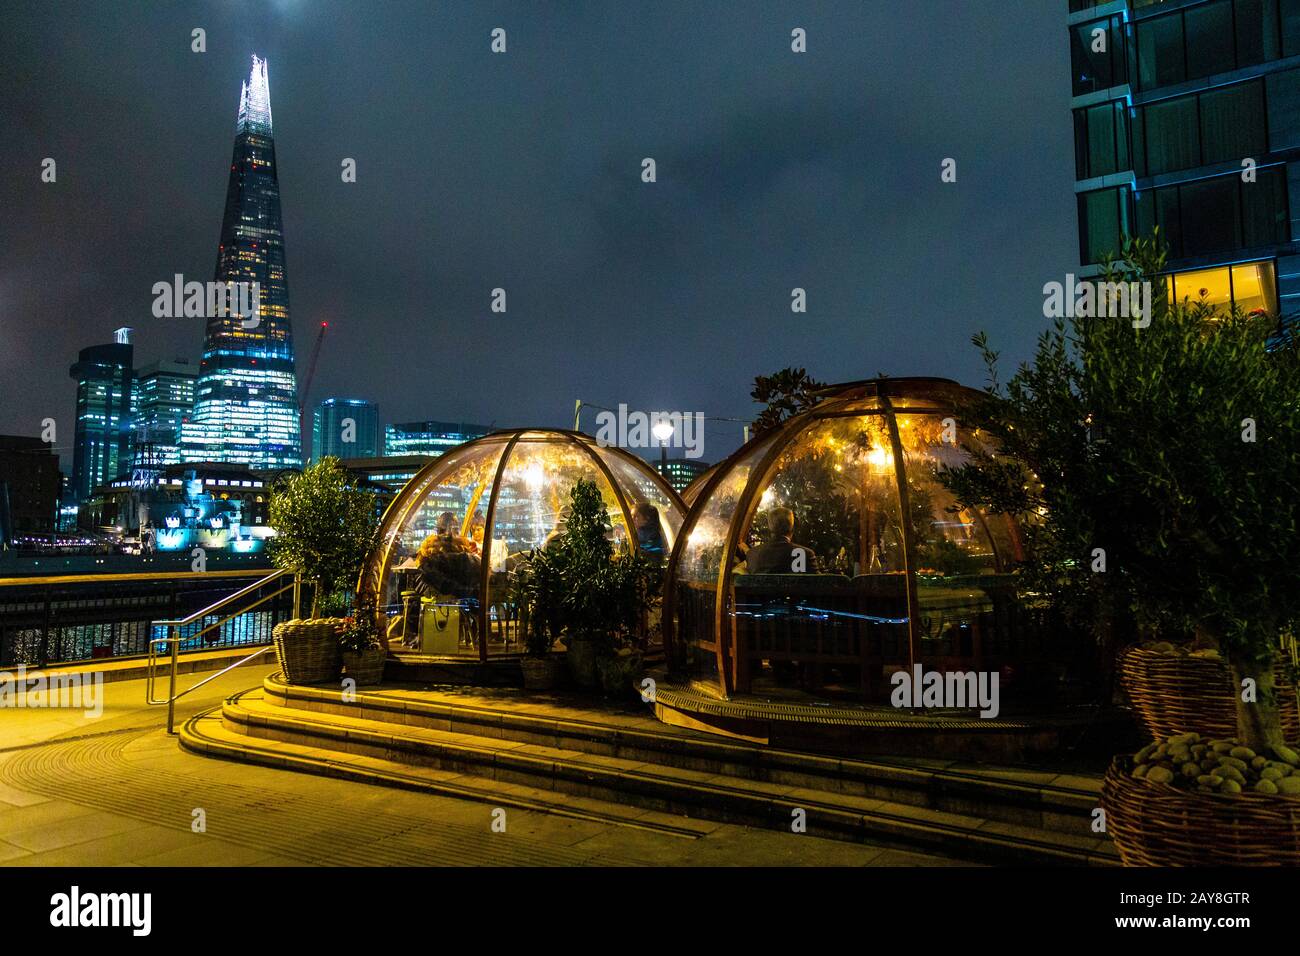 Dining igloos at Coppa Club on the Thames riverbank, London, UK Stock Photo